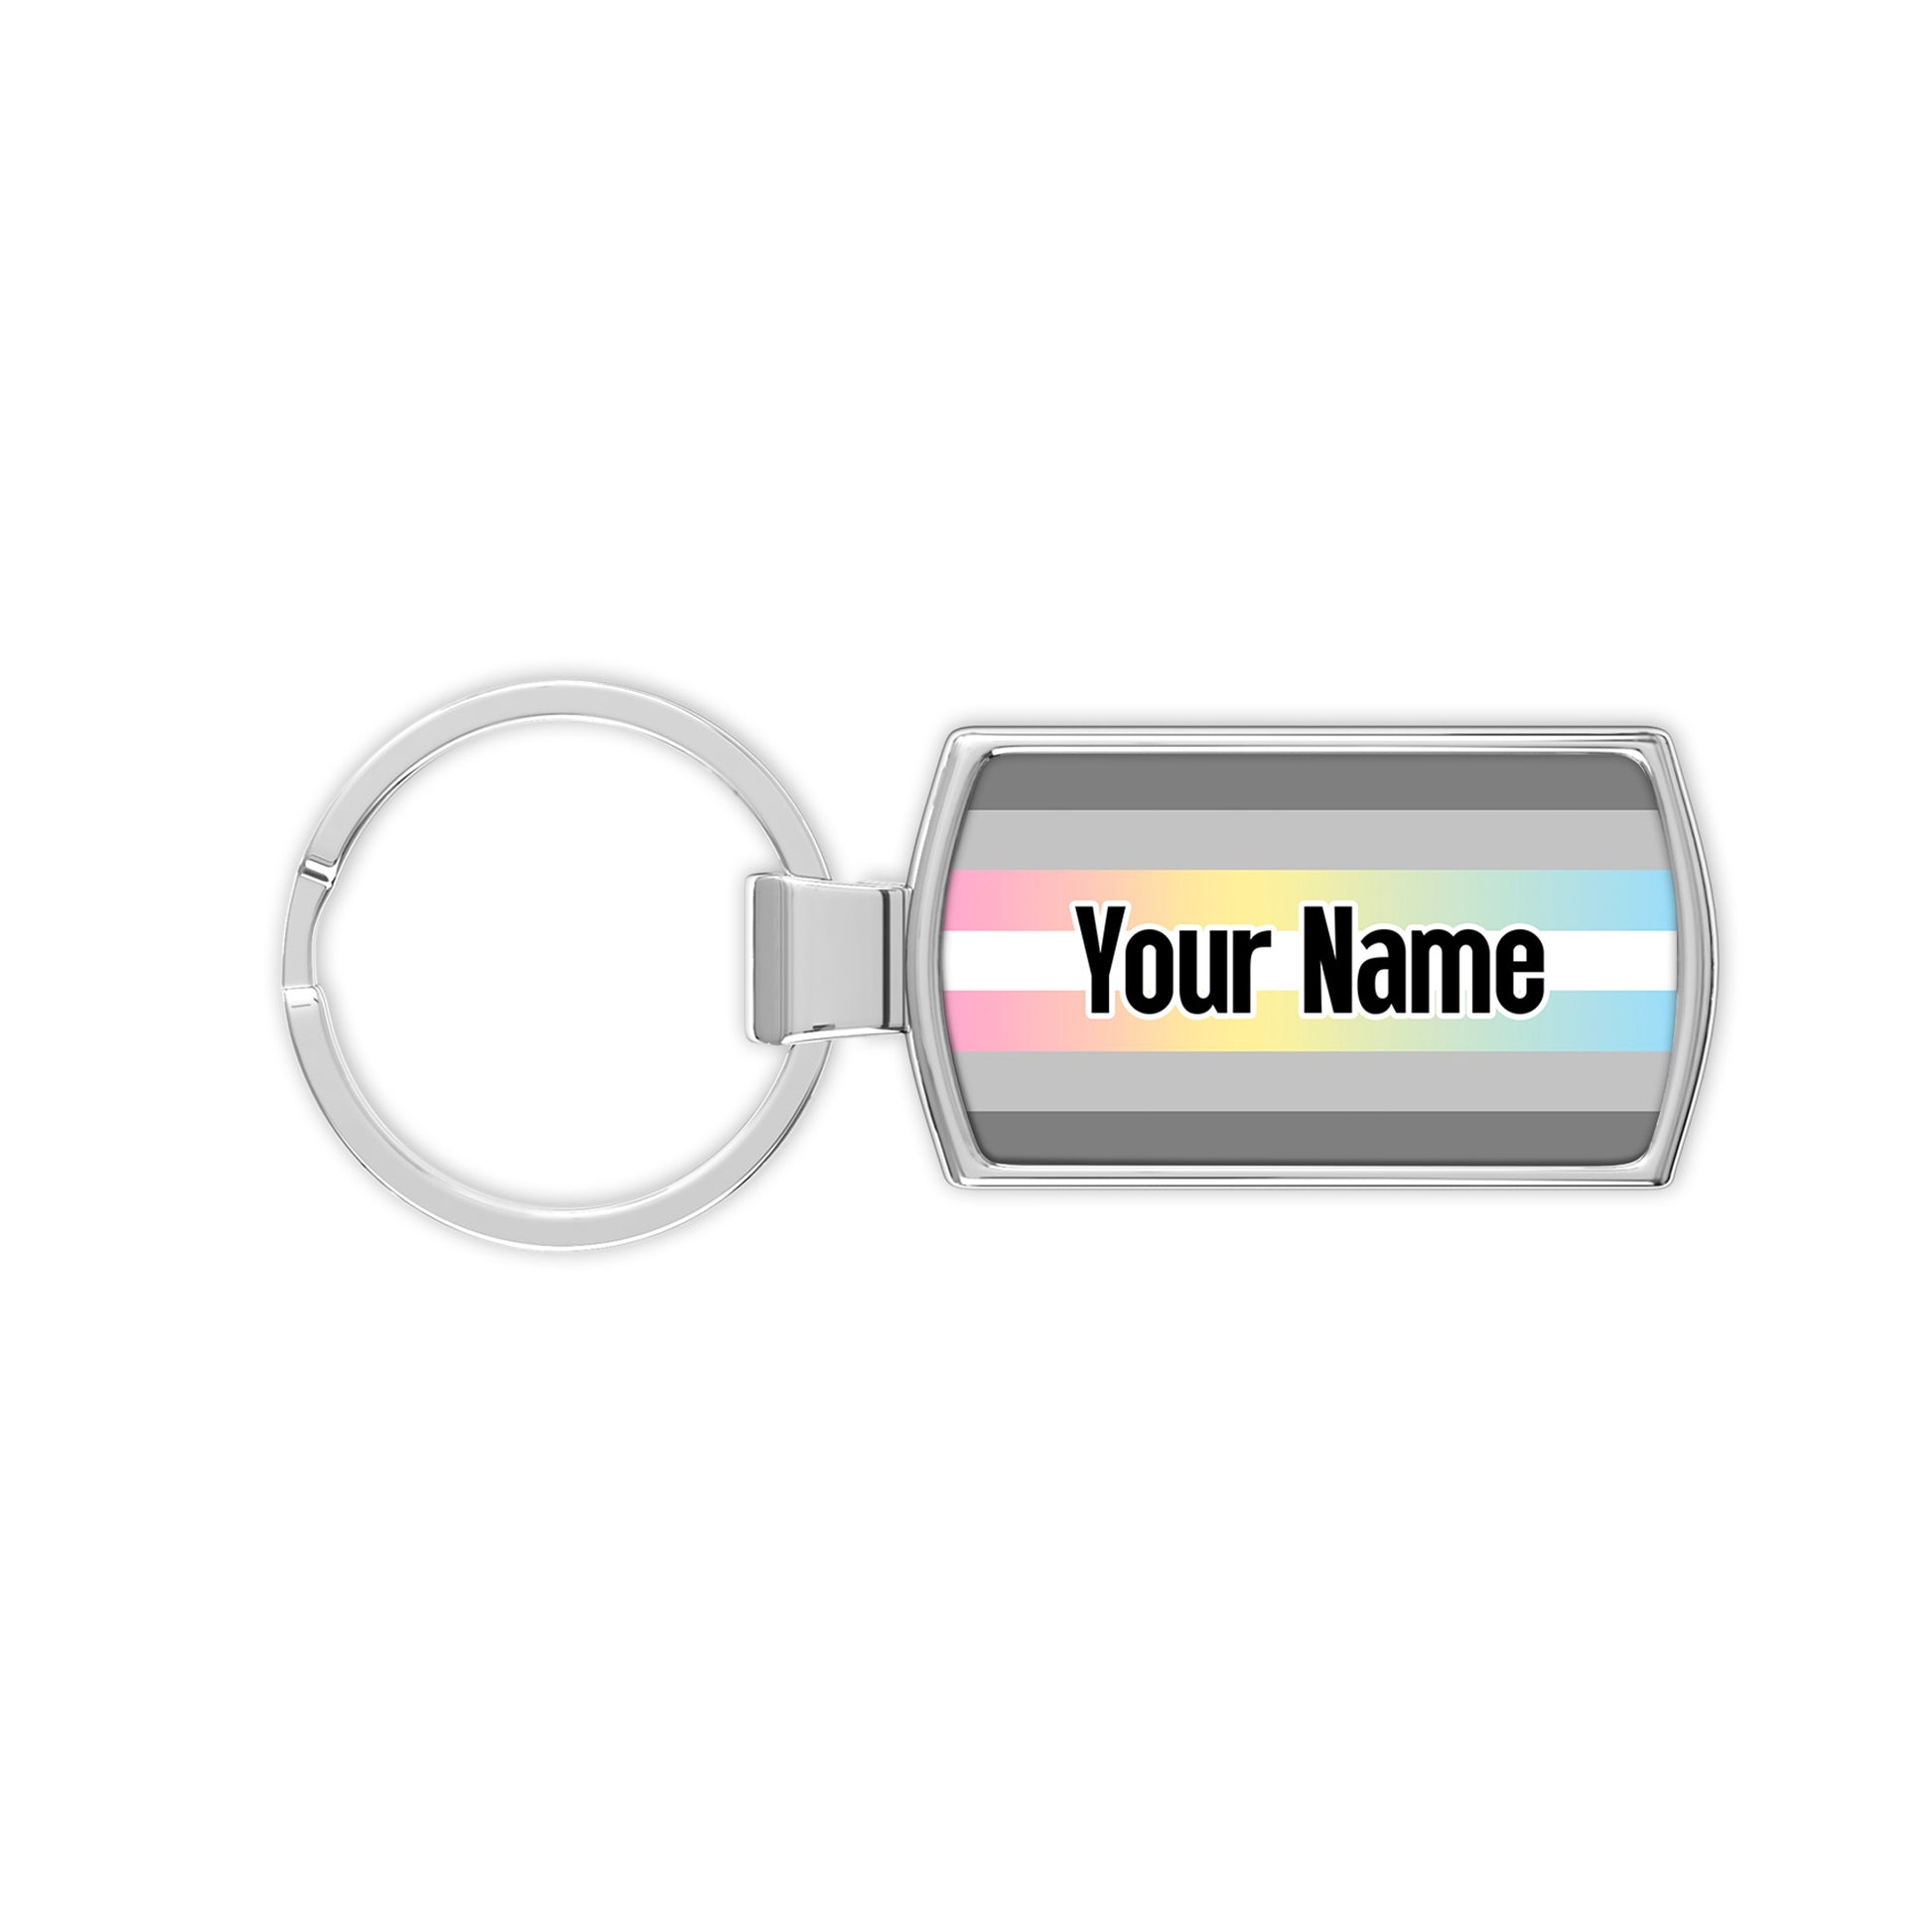 Demiflux pride flag metal keyring that comes personalised with your name